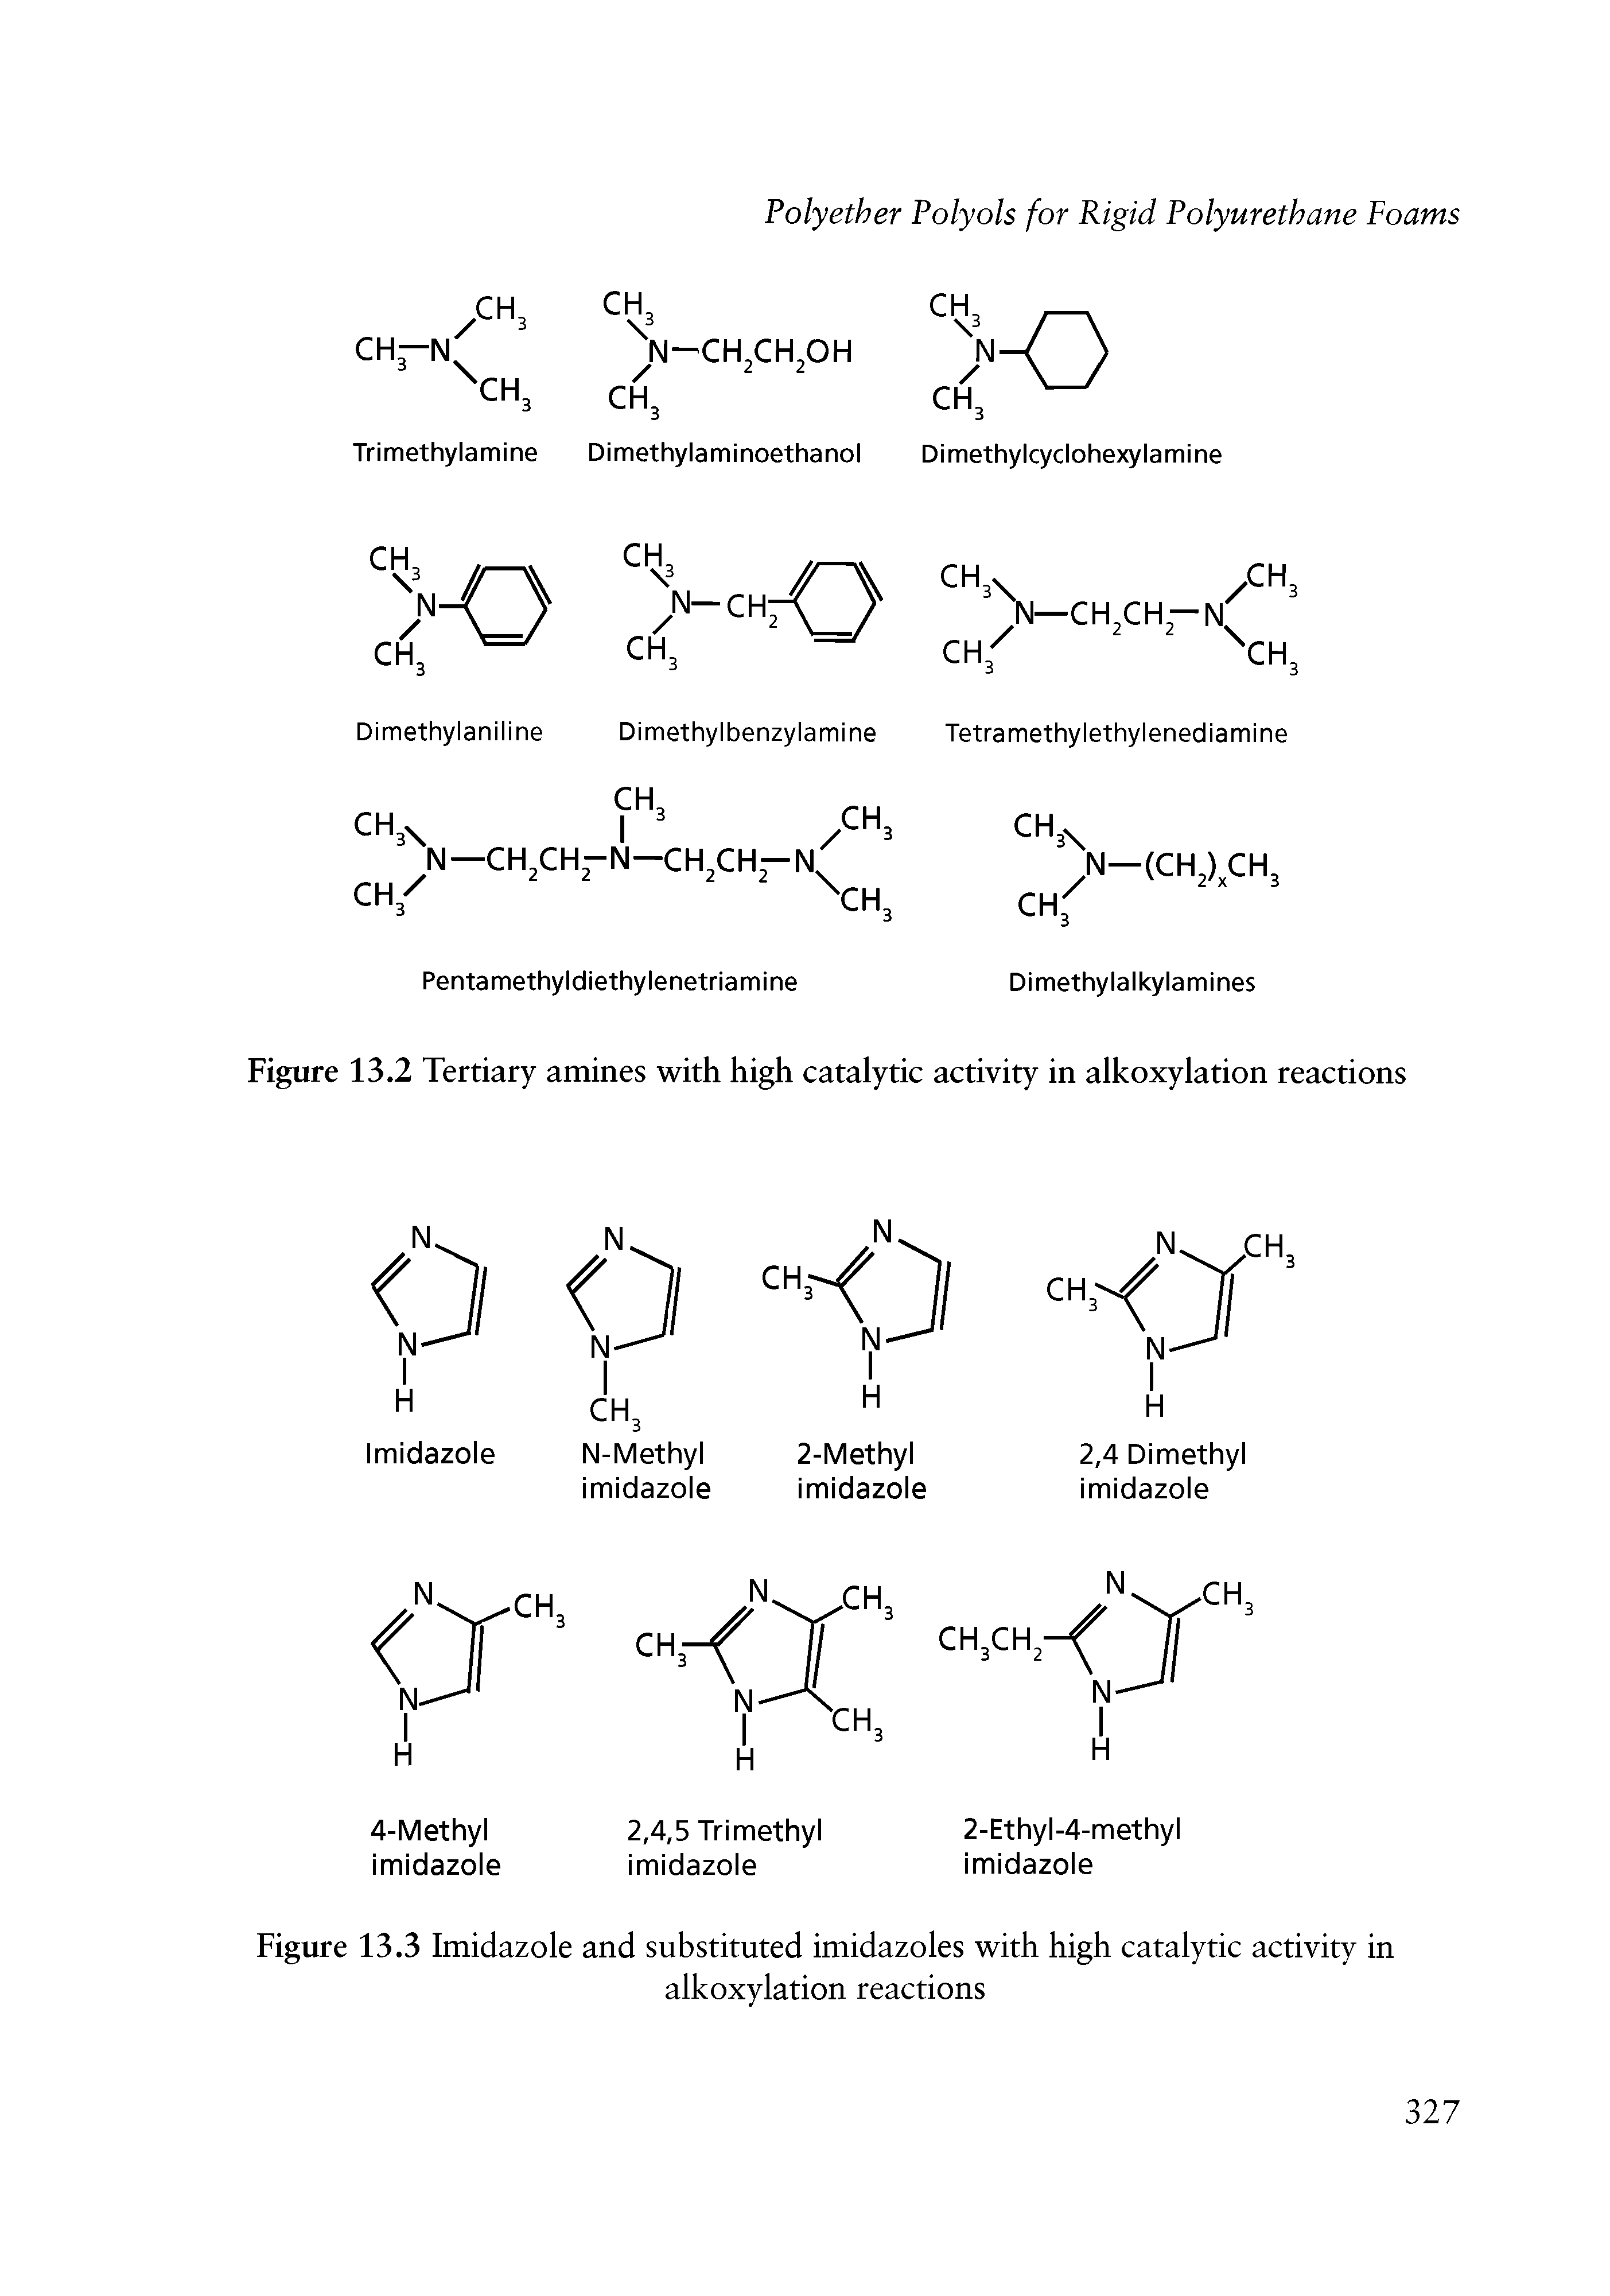 Figure 13.2 Tertiary amines with high catalytic activity in alkoxylation reactions...